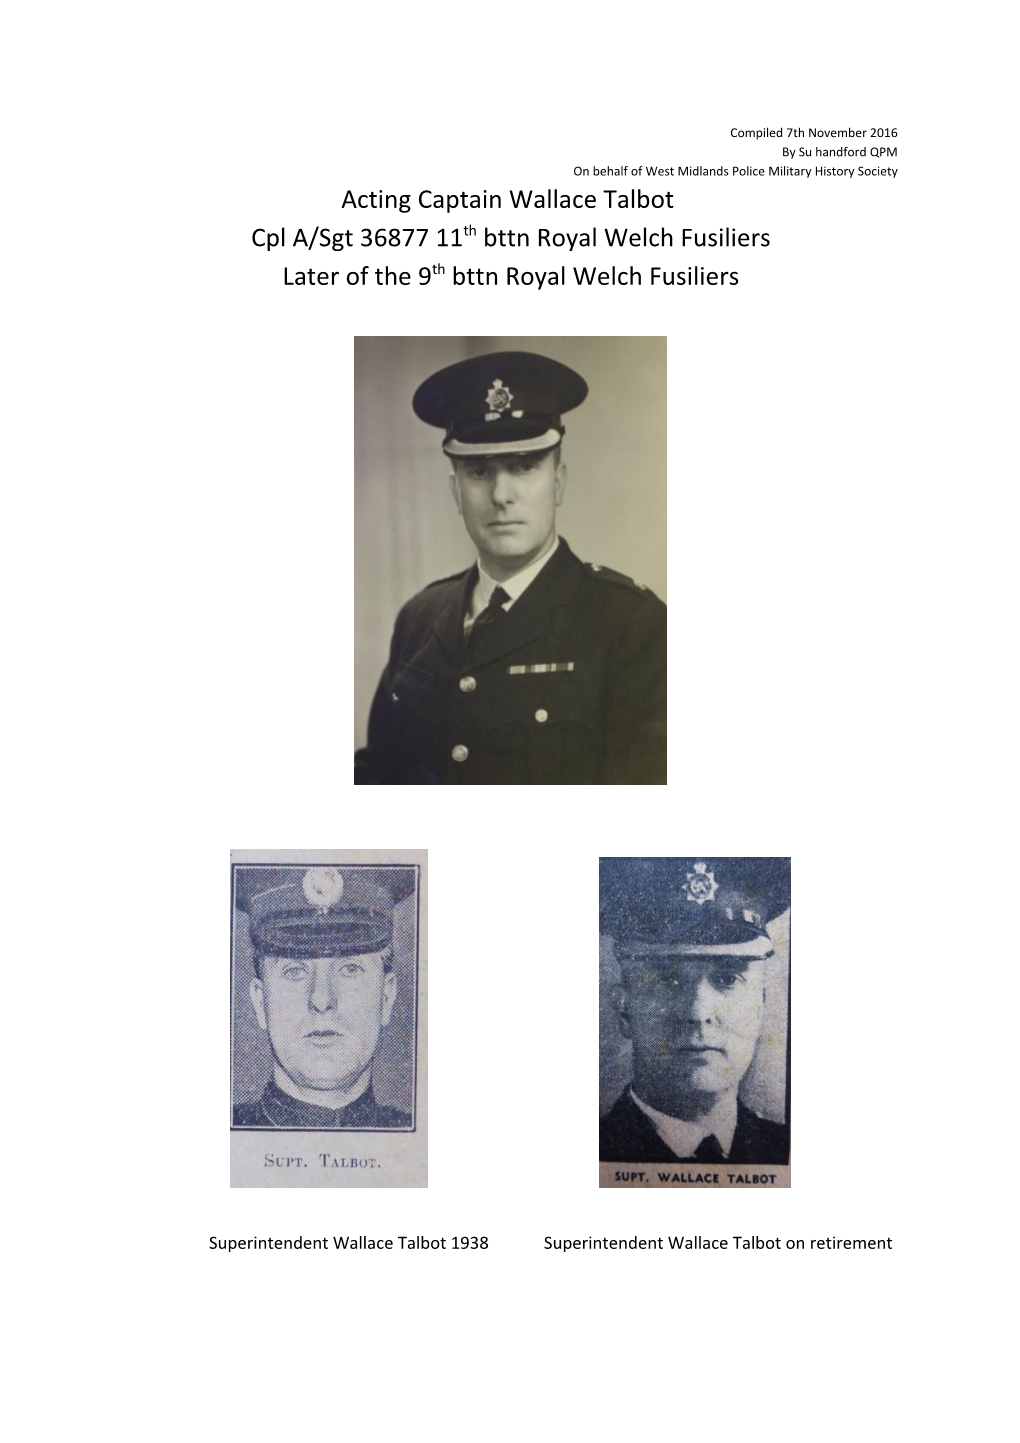 On Behalf of West Midlands Police Military History Society